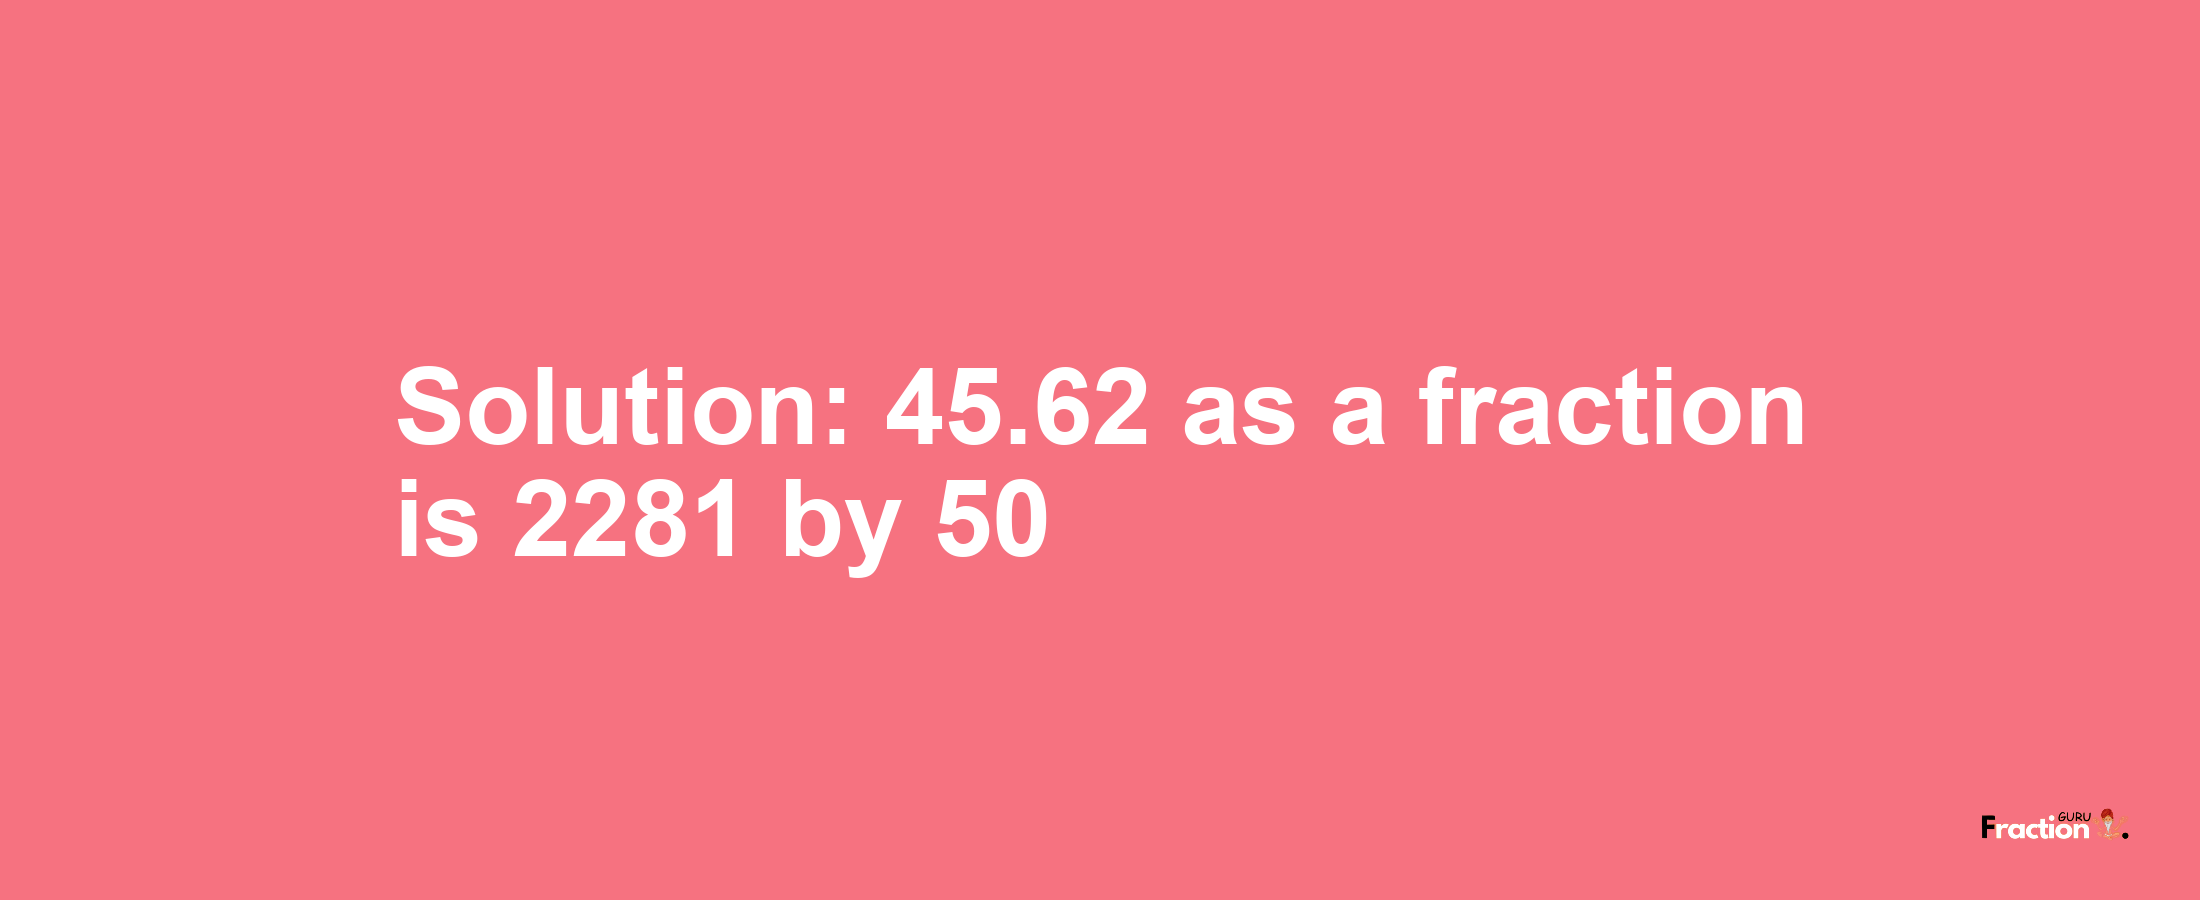 Solution:45.62 as a fraction is 2281/50